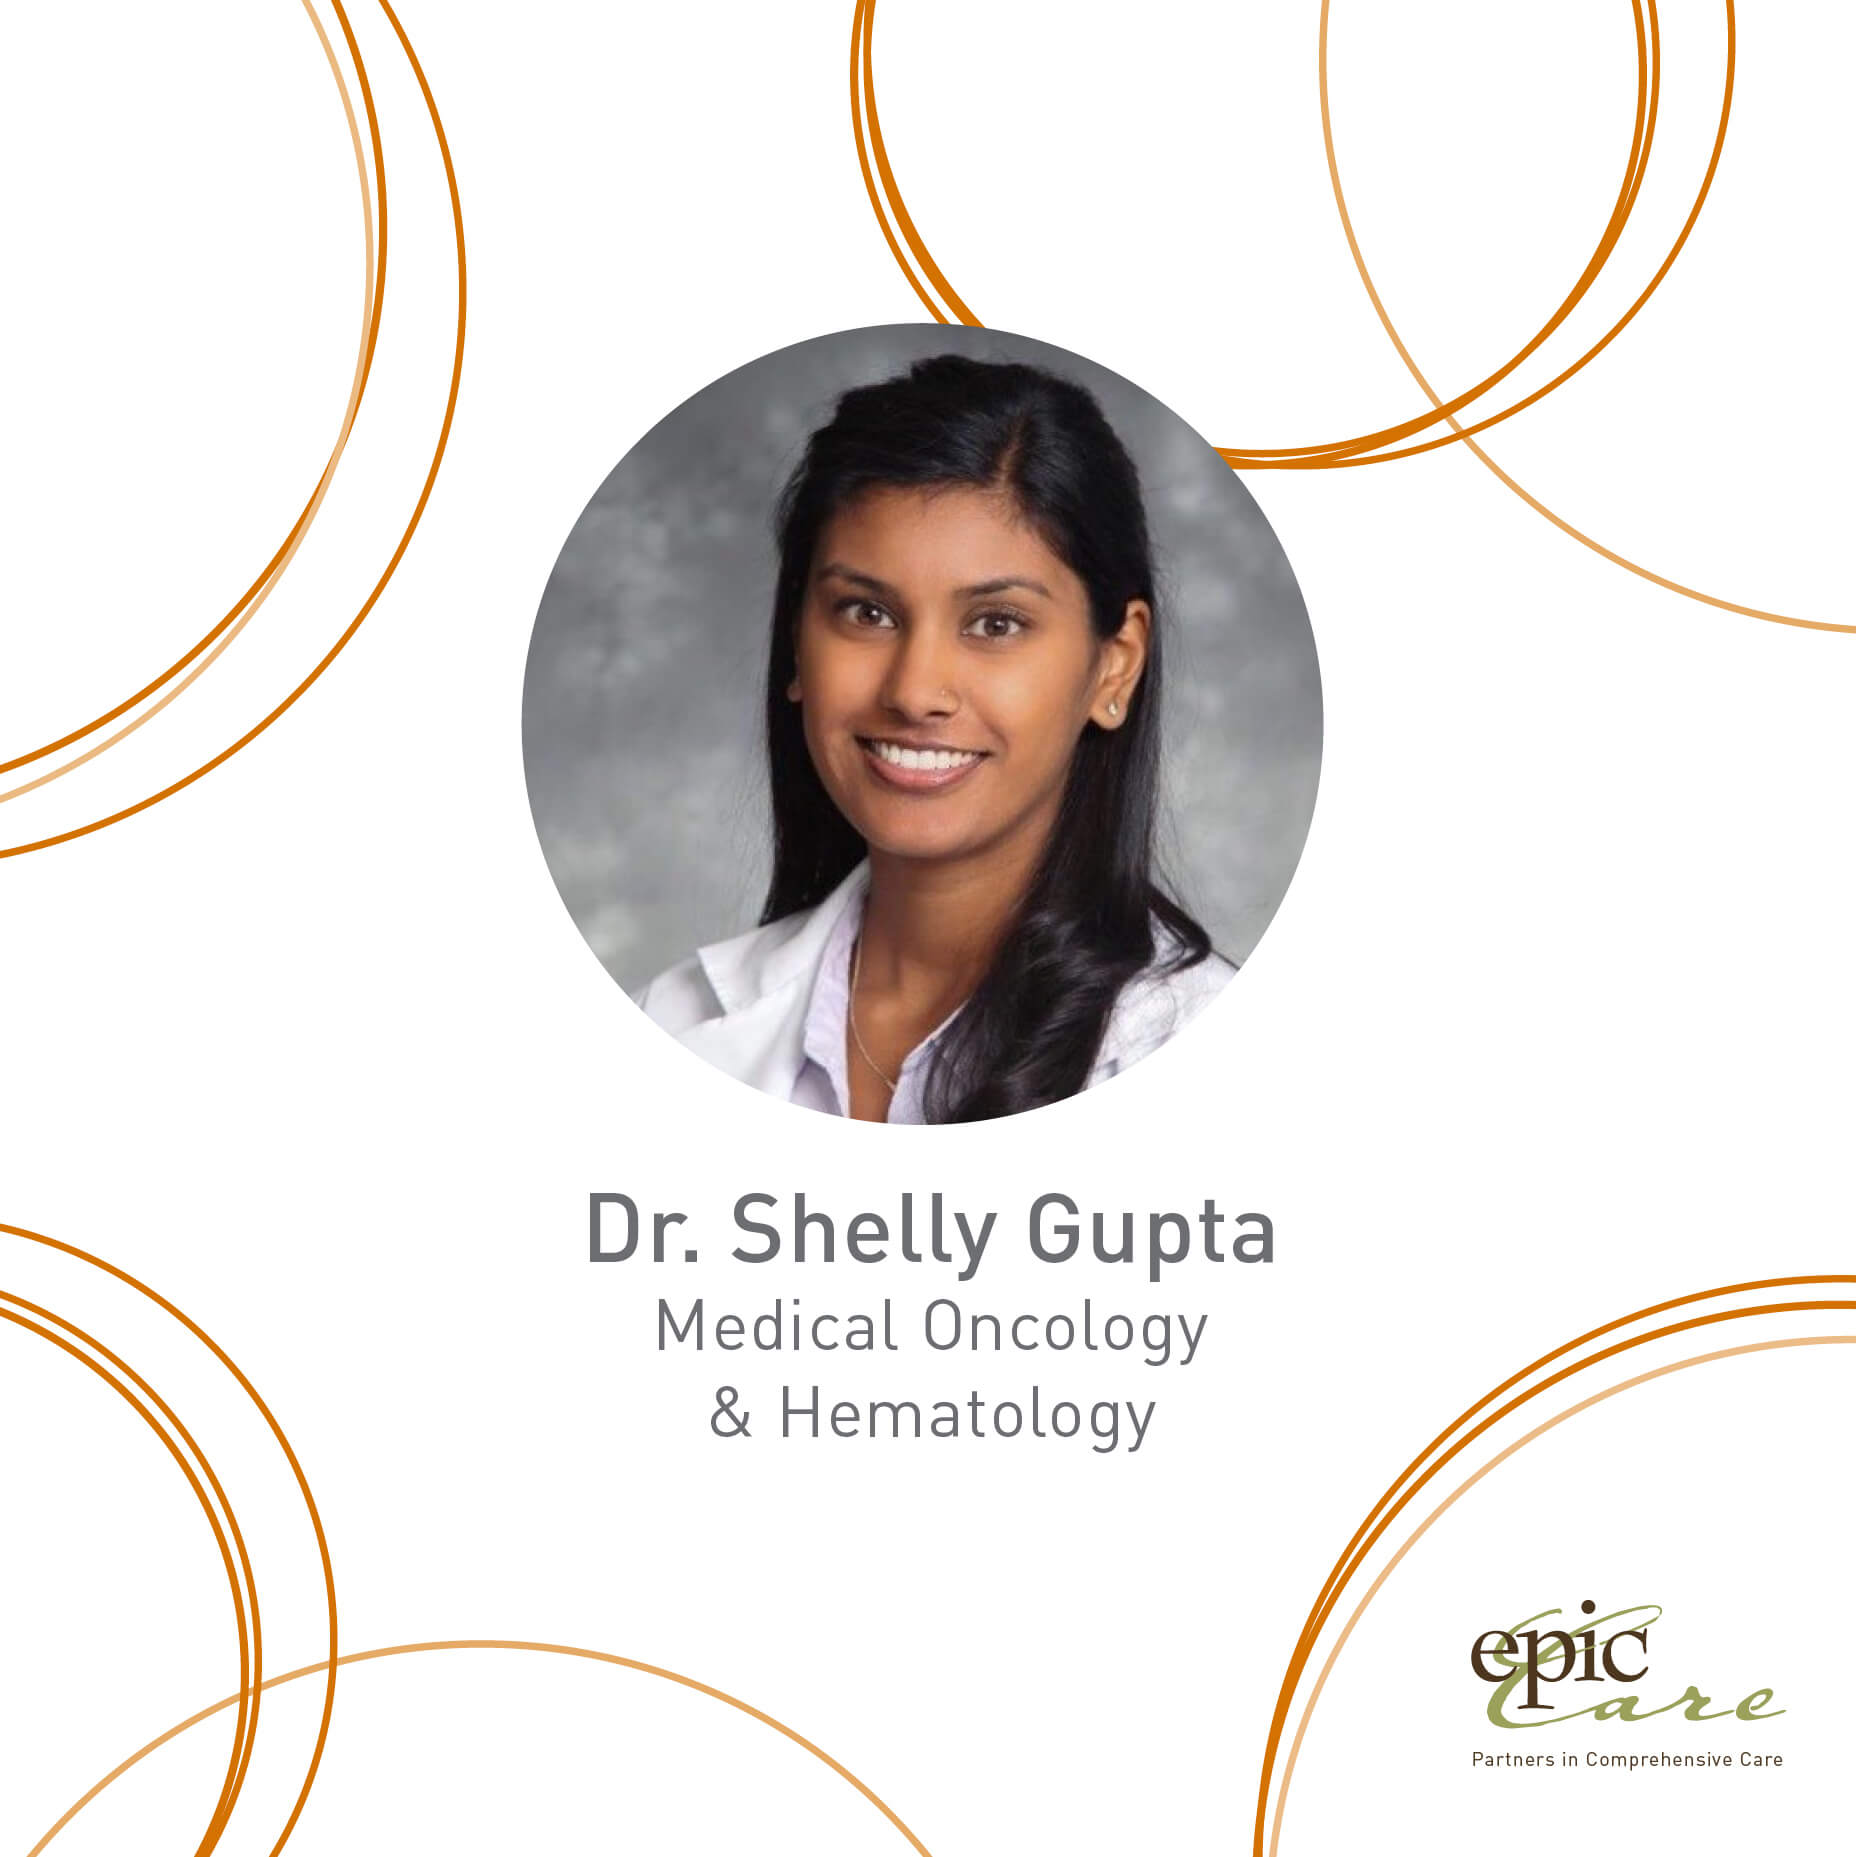 Welcome Dr. Shelly Gupta To The Epic Care Team!